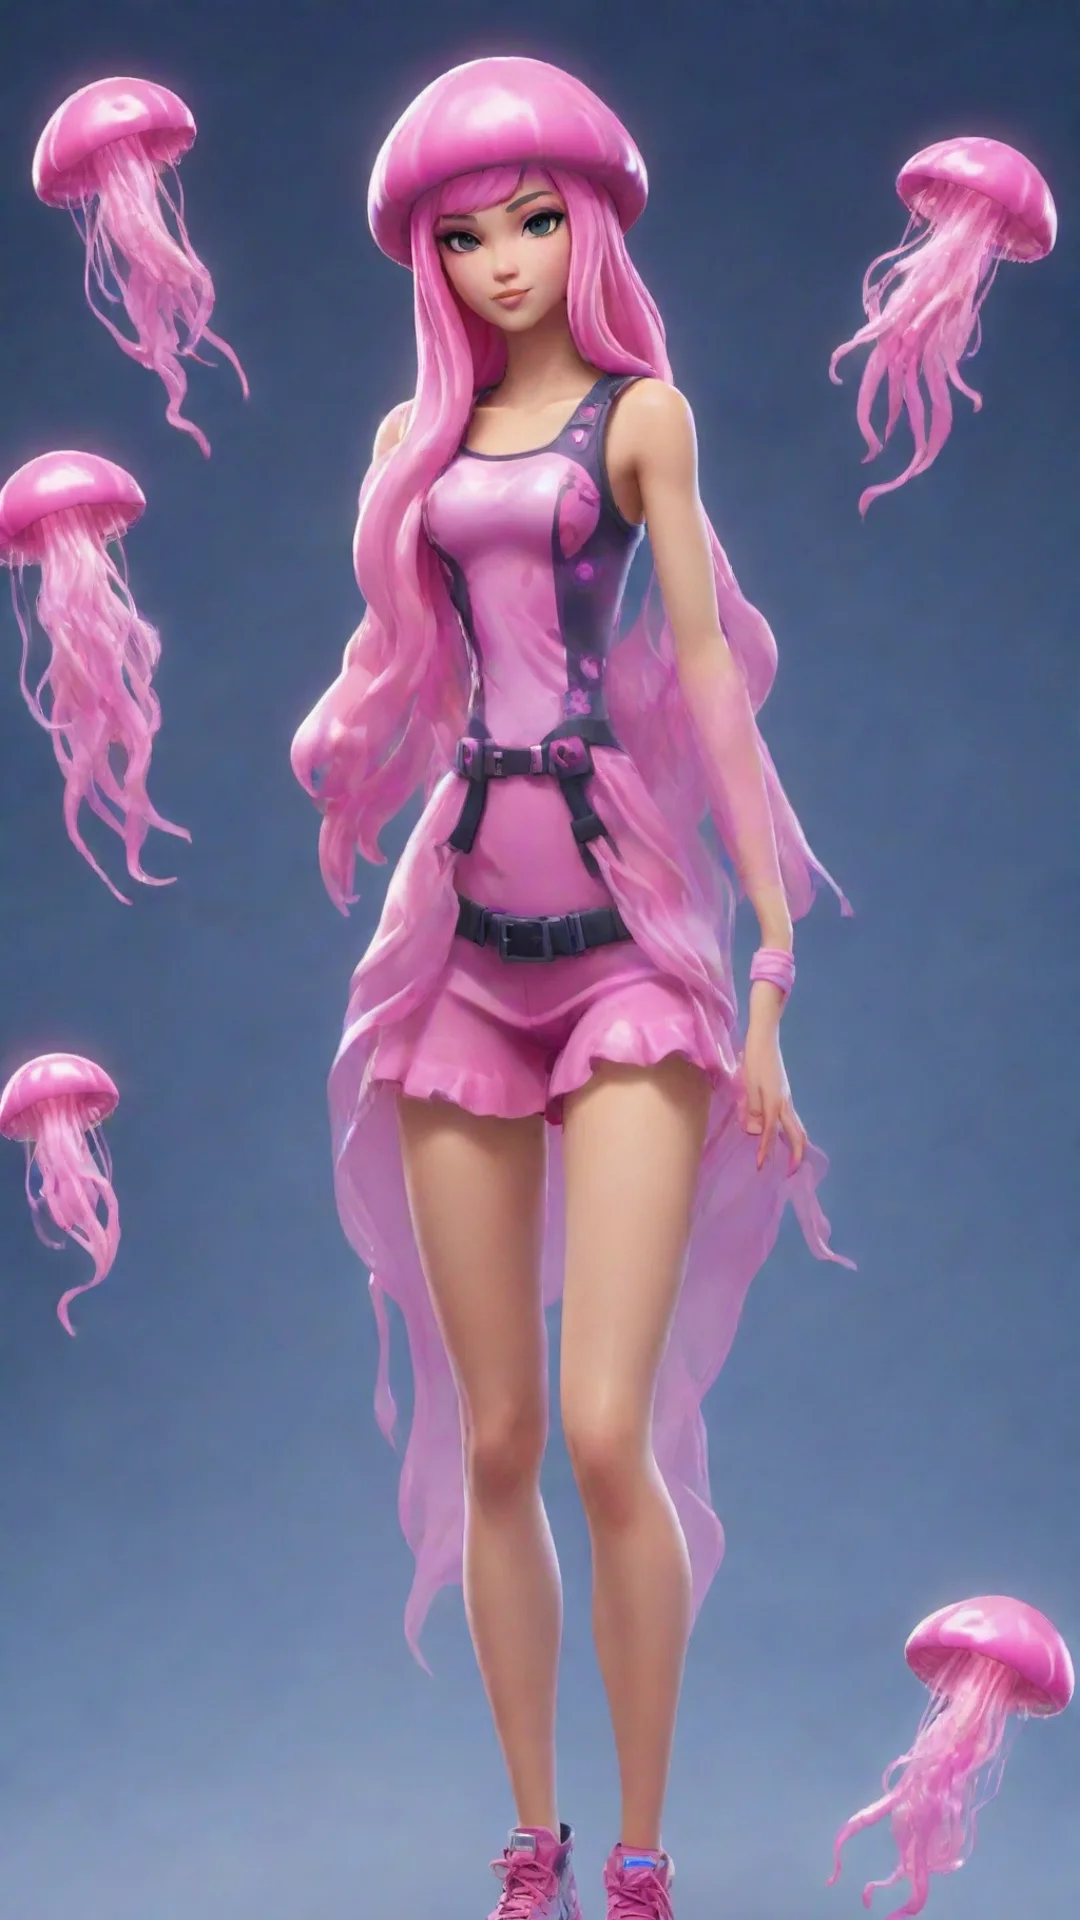 aiamazing pink jellyfish style fortnite girl skin awesome portrait 2 tall